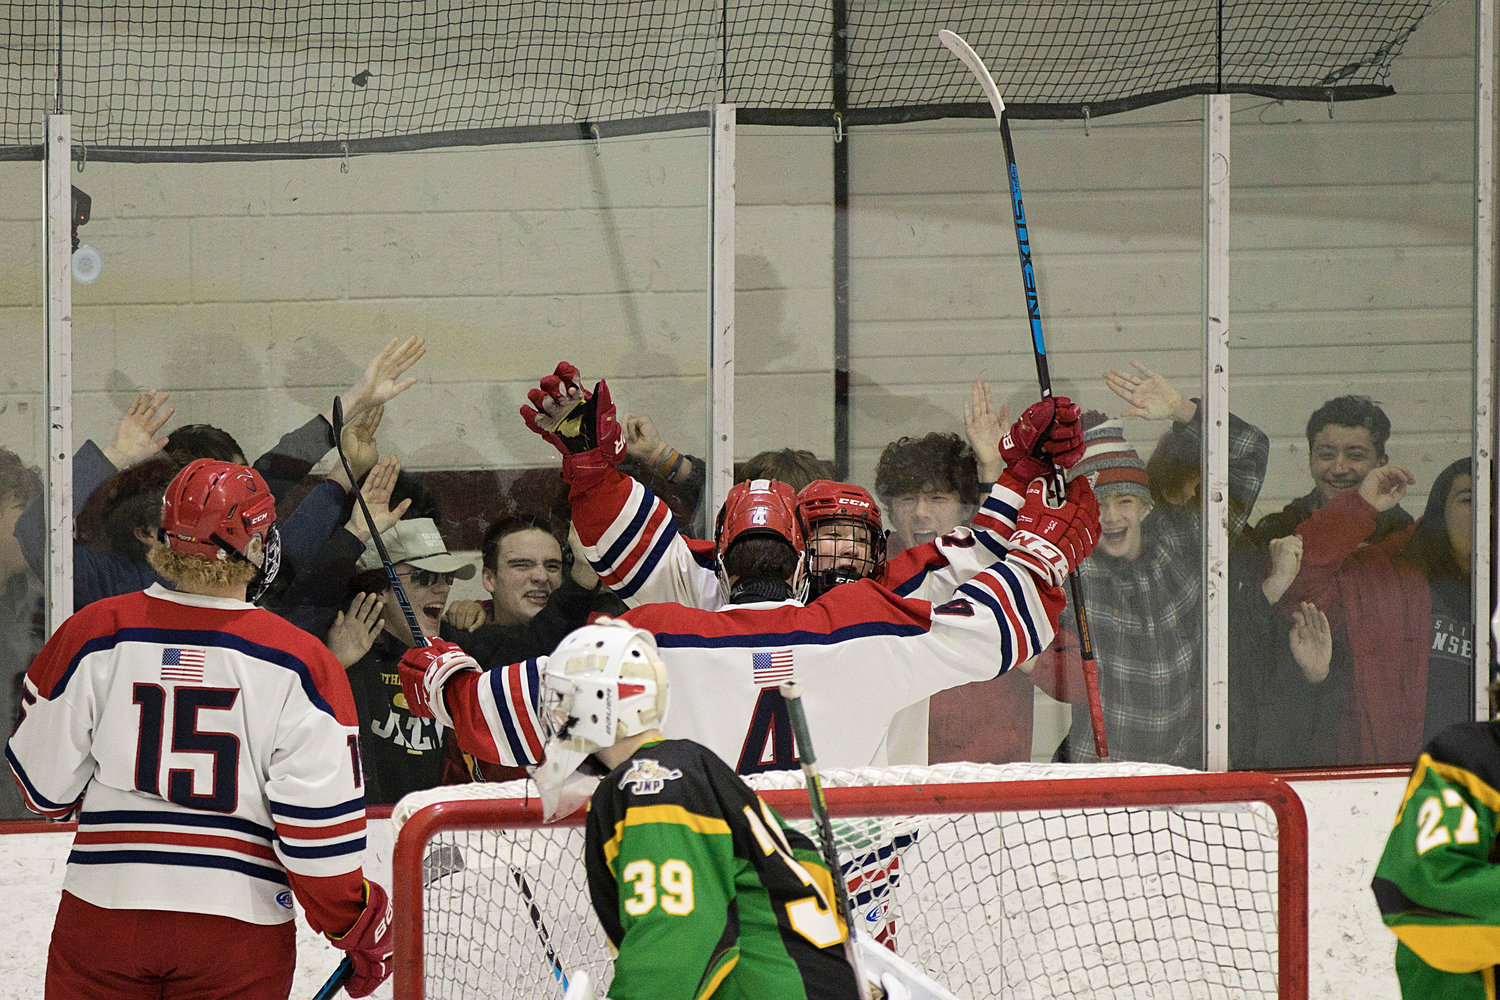 Fans pound on the glass while Andrew Alvanas and Joseph Levreault celebrate a first-period goal.